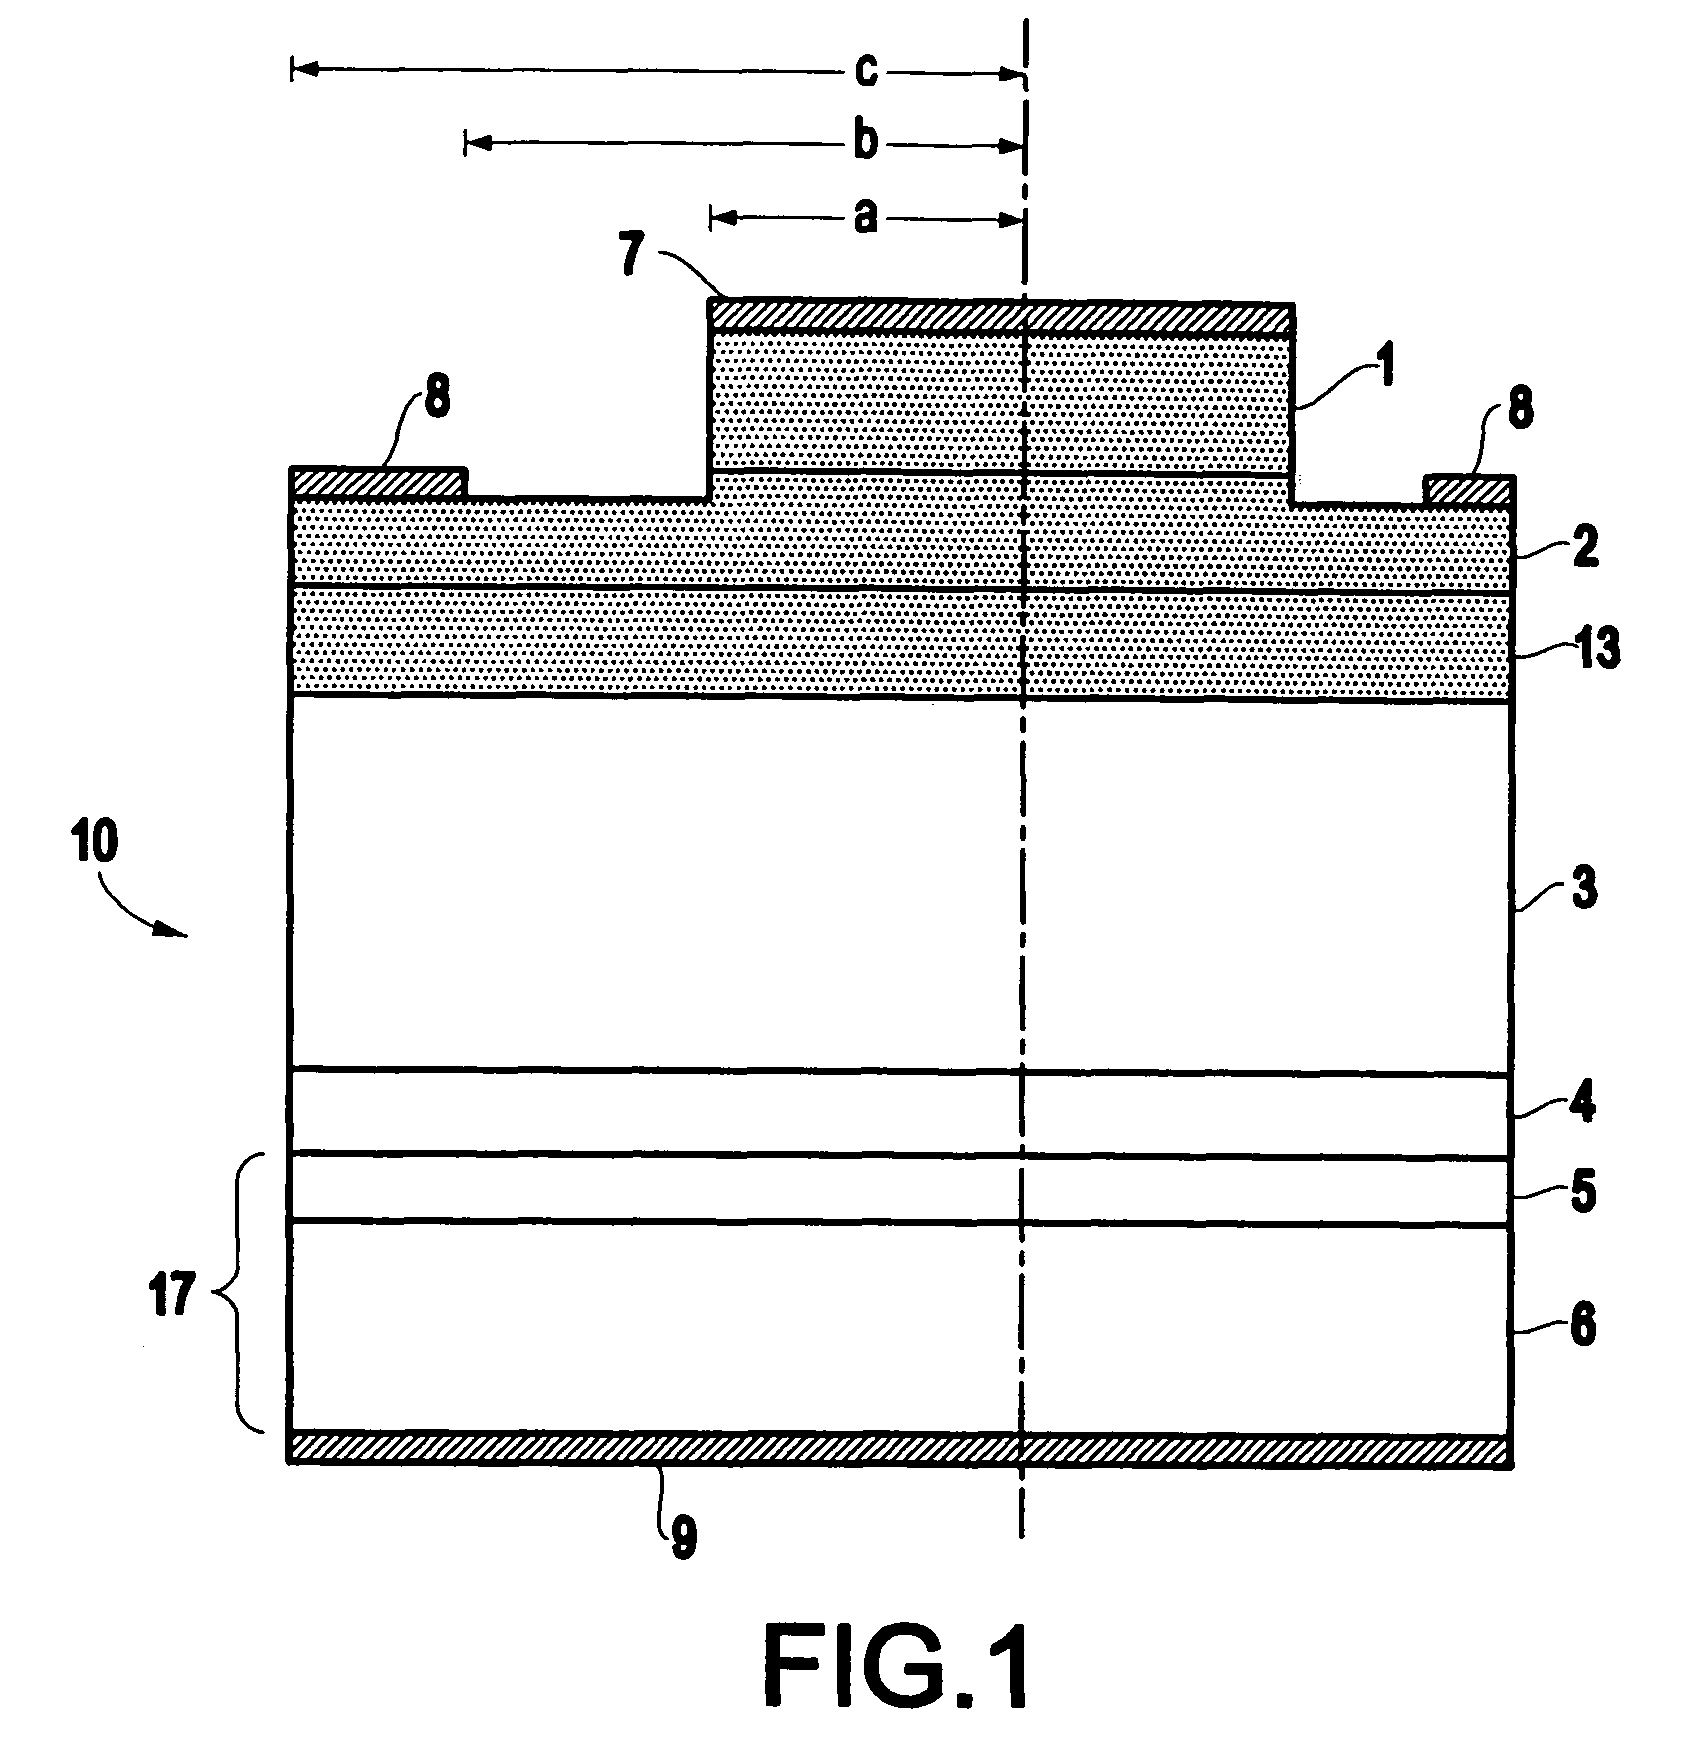 Processing technique to improve the turn-off gain of a silicon carbide gate turn-off thyristor